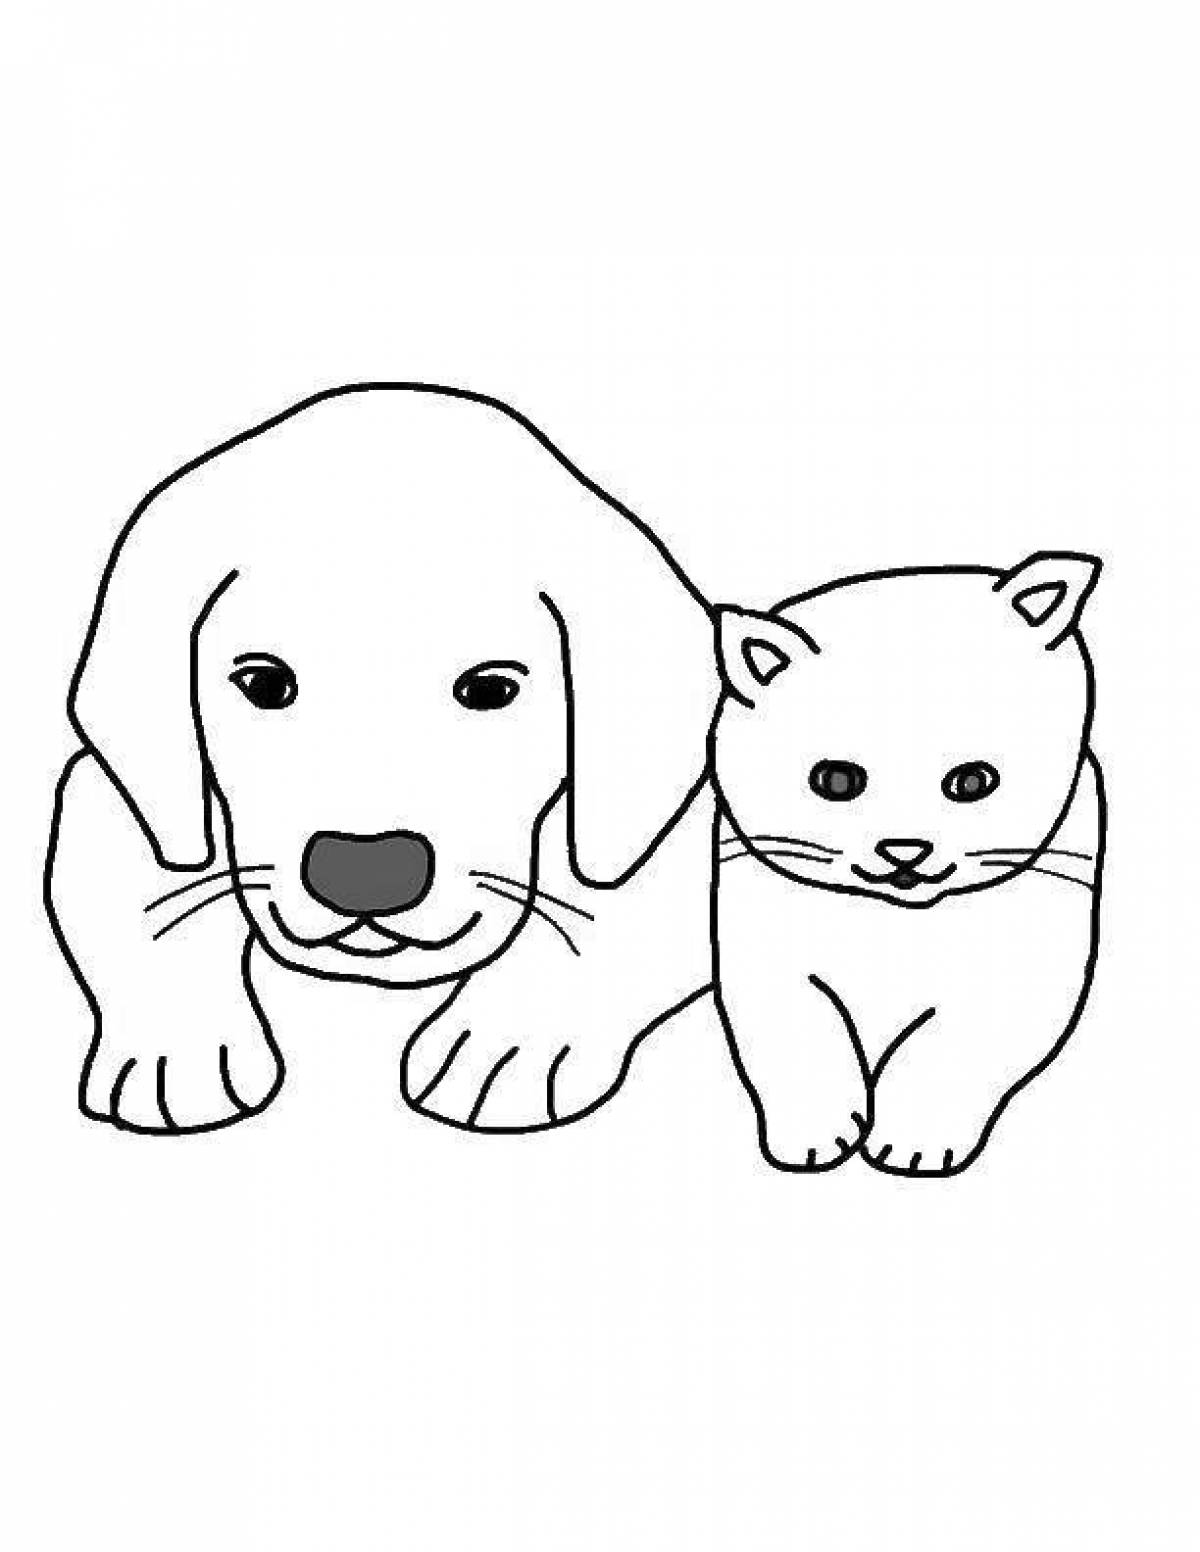 Fluffy coloring pages animals cats and dogs